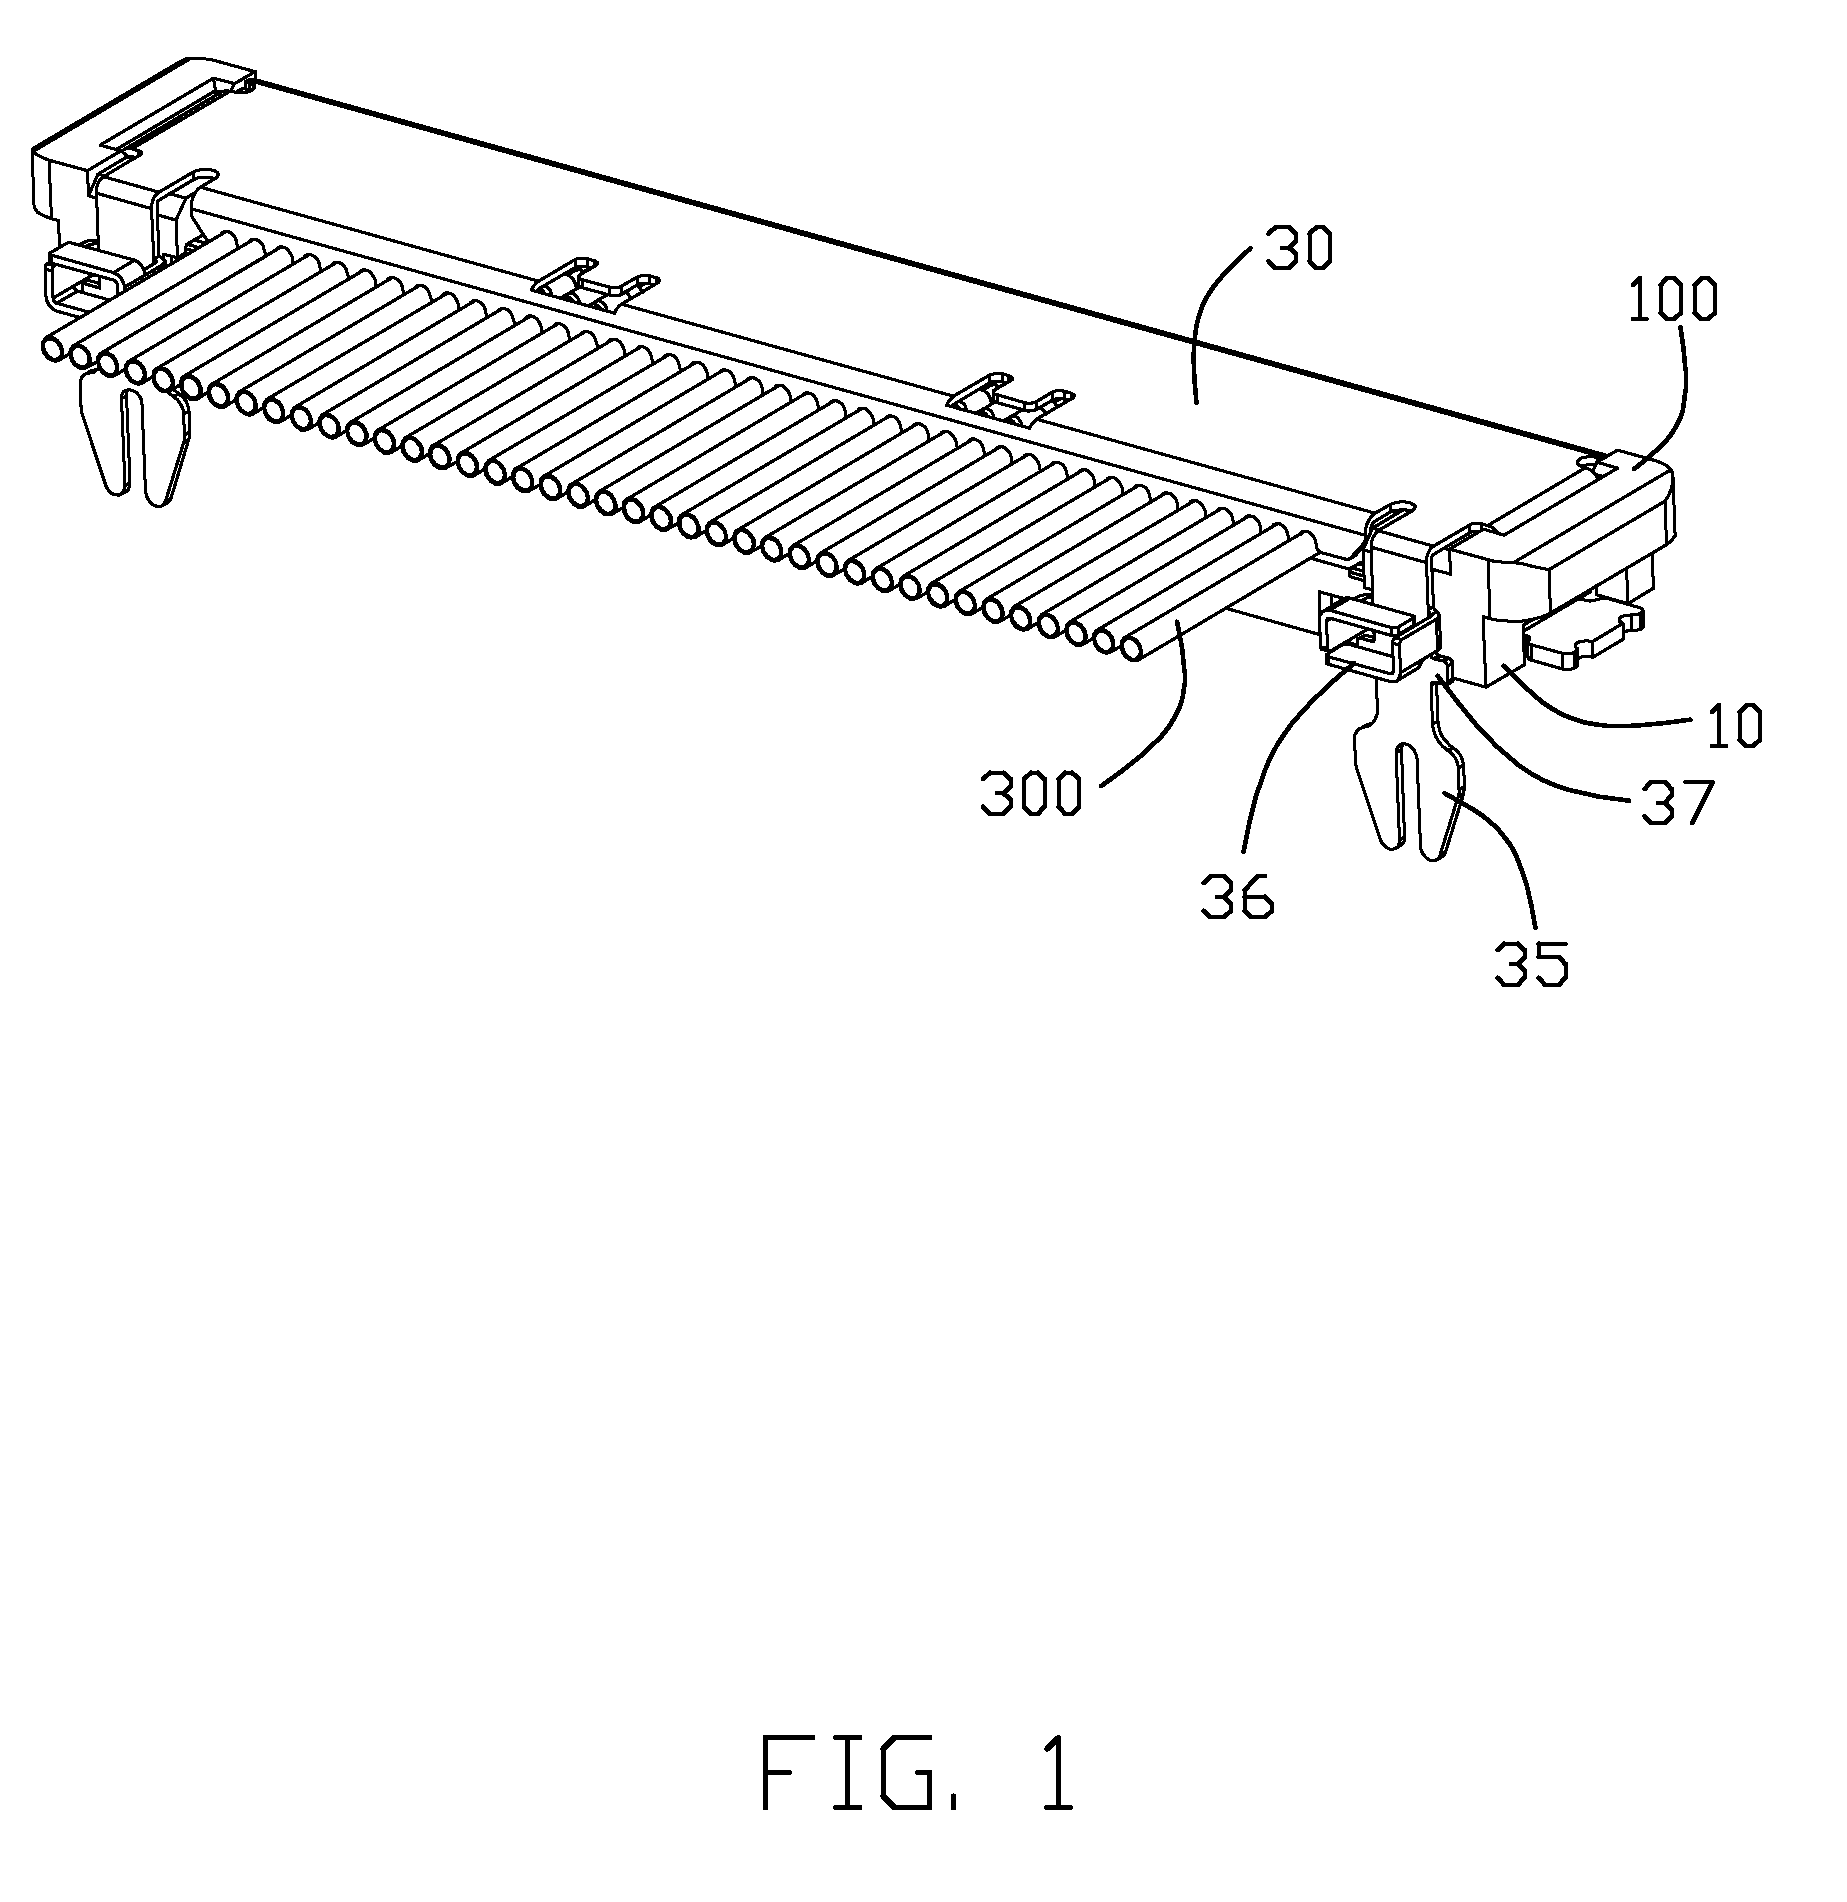 Cable assembly having hold-down arrangement